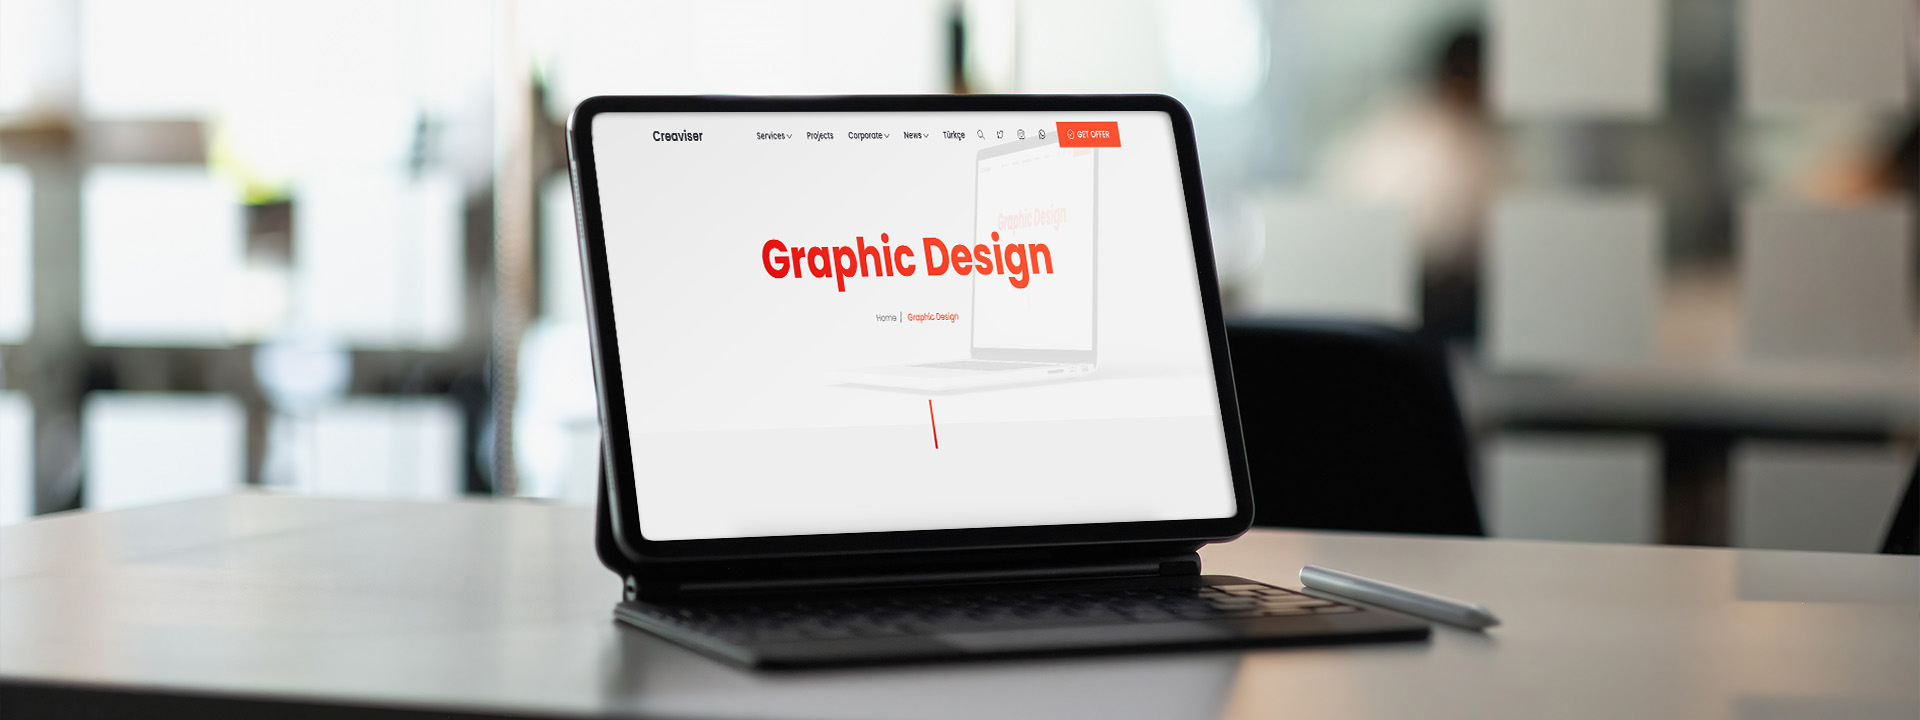 Graphic Design Frequently Asked Questions